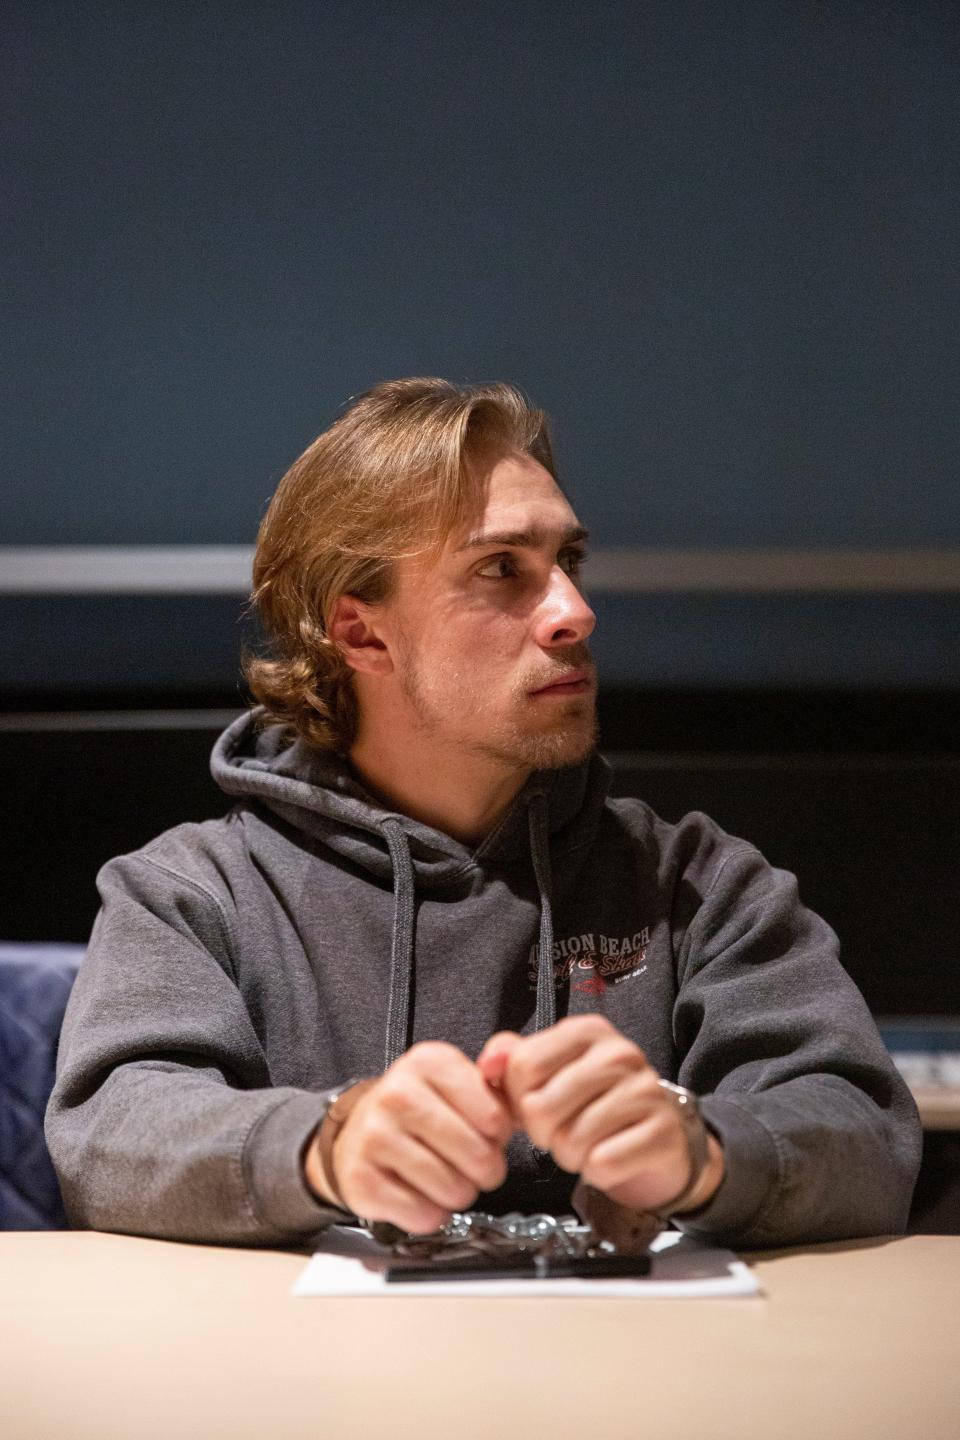 Actor Nick Check takes on the role of Billy the Kid in rehearsal for stage production "The Trial of Billy the Kid" on Tuesday, Feb. 7, 2023, at New Mexico State University.